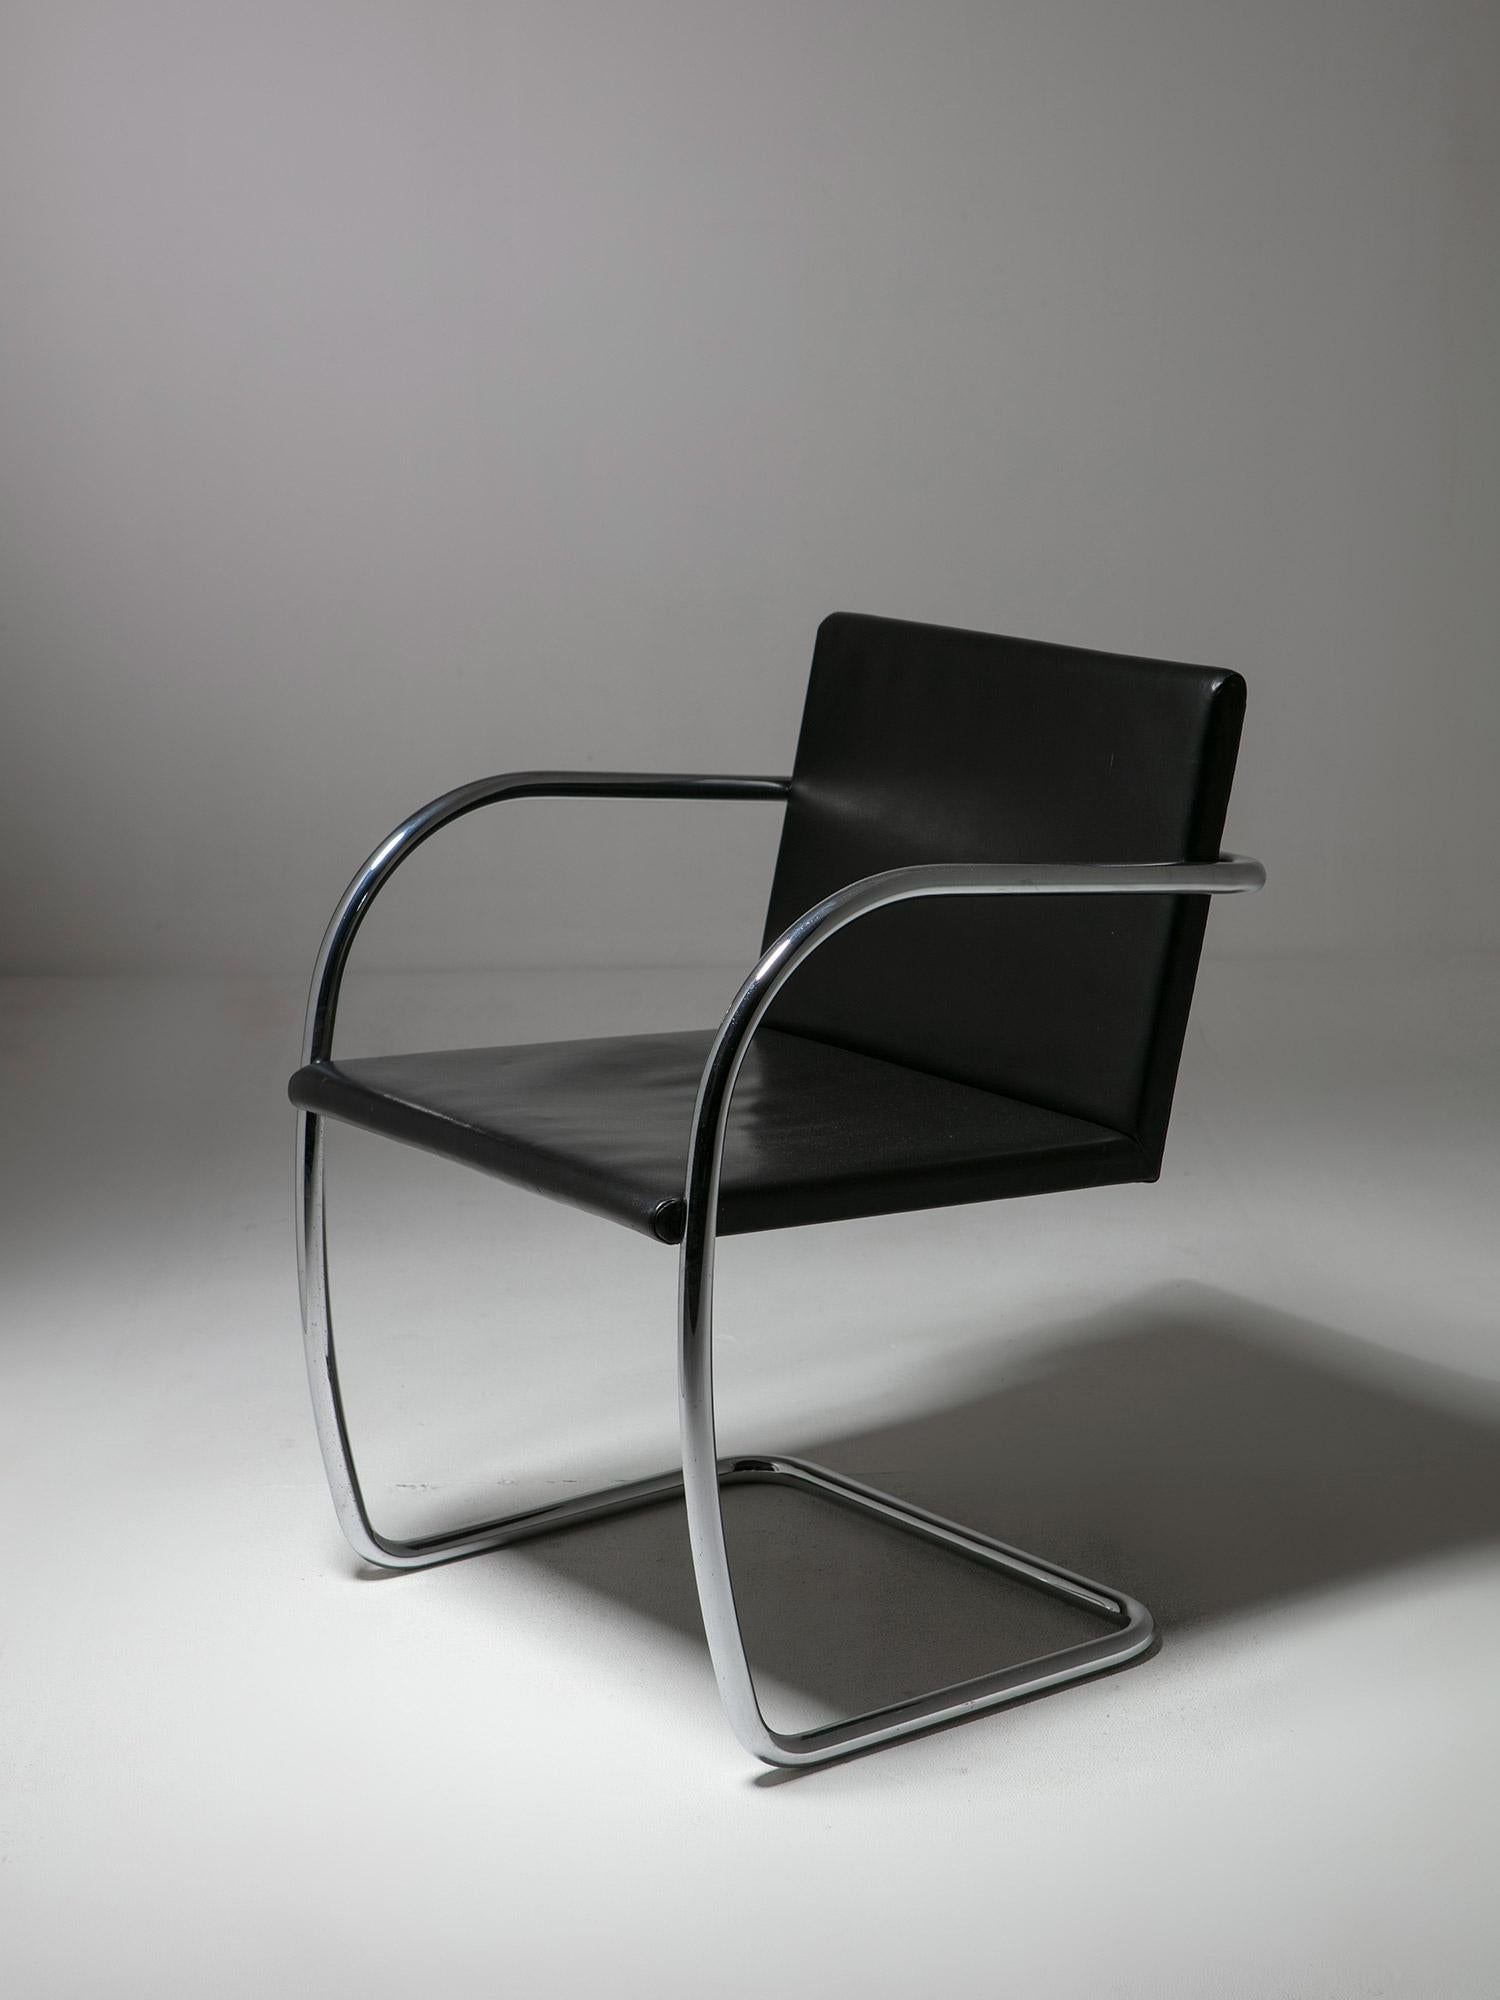 245 armchair by Ludwig Mies van der Rohe for Knoll
Early edition with original leather and stainless steel frame. 